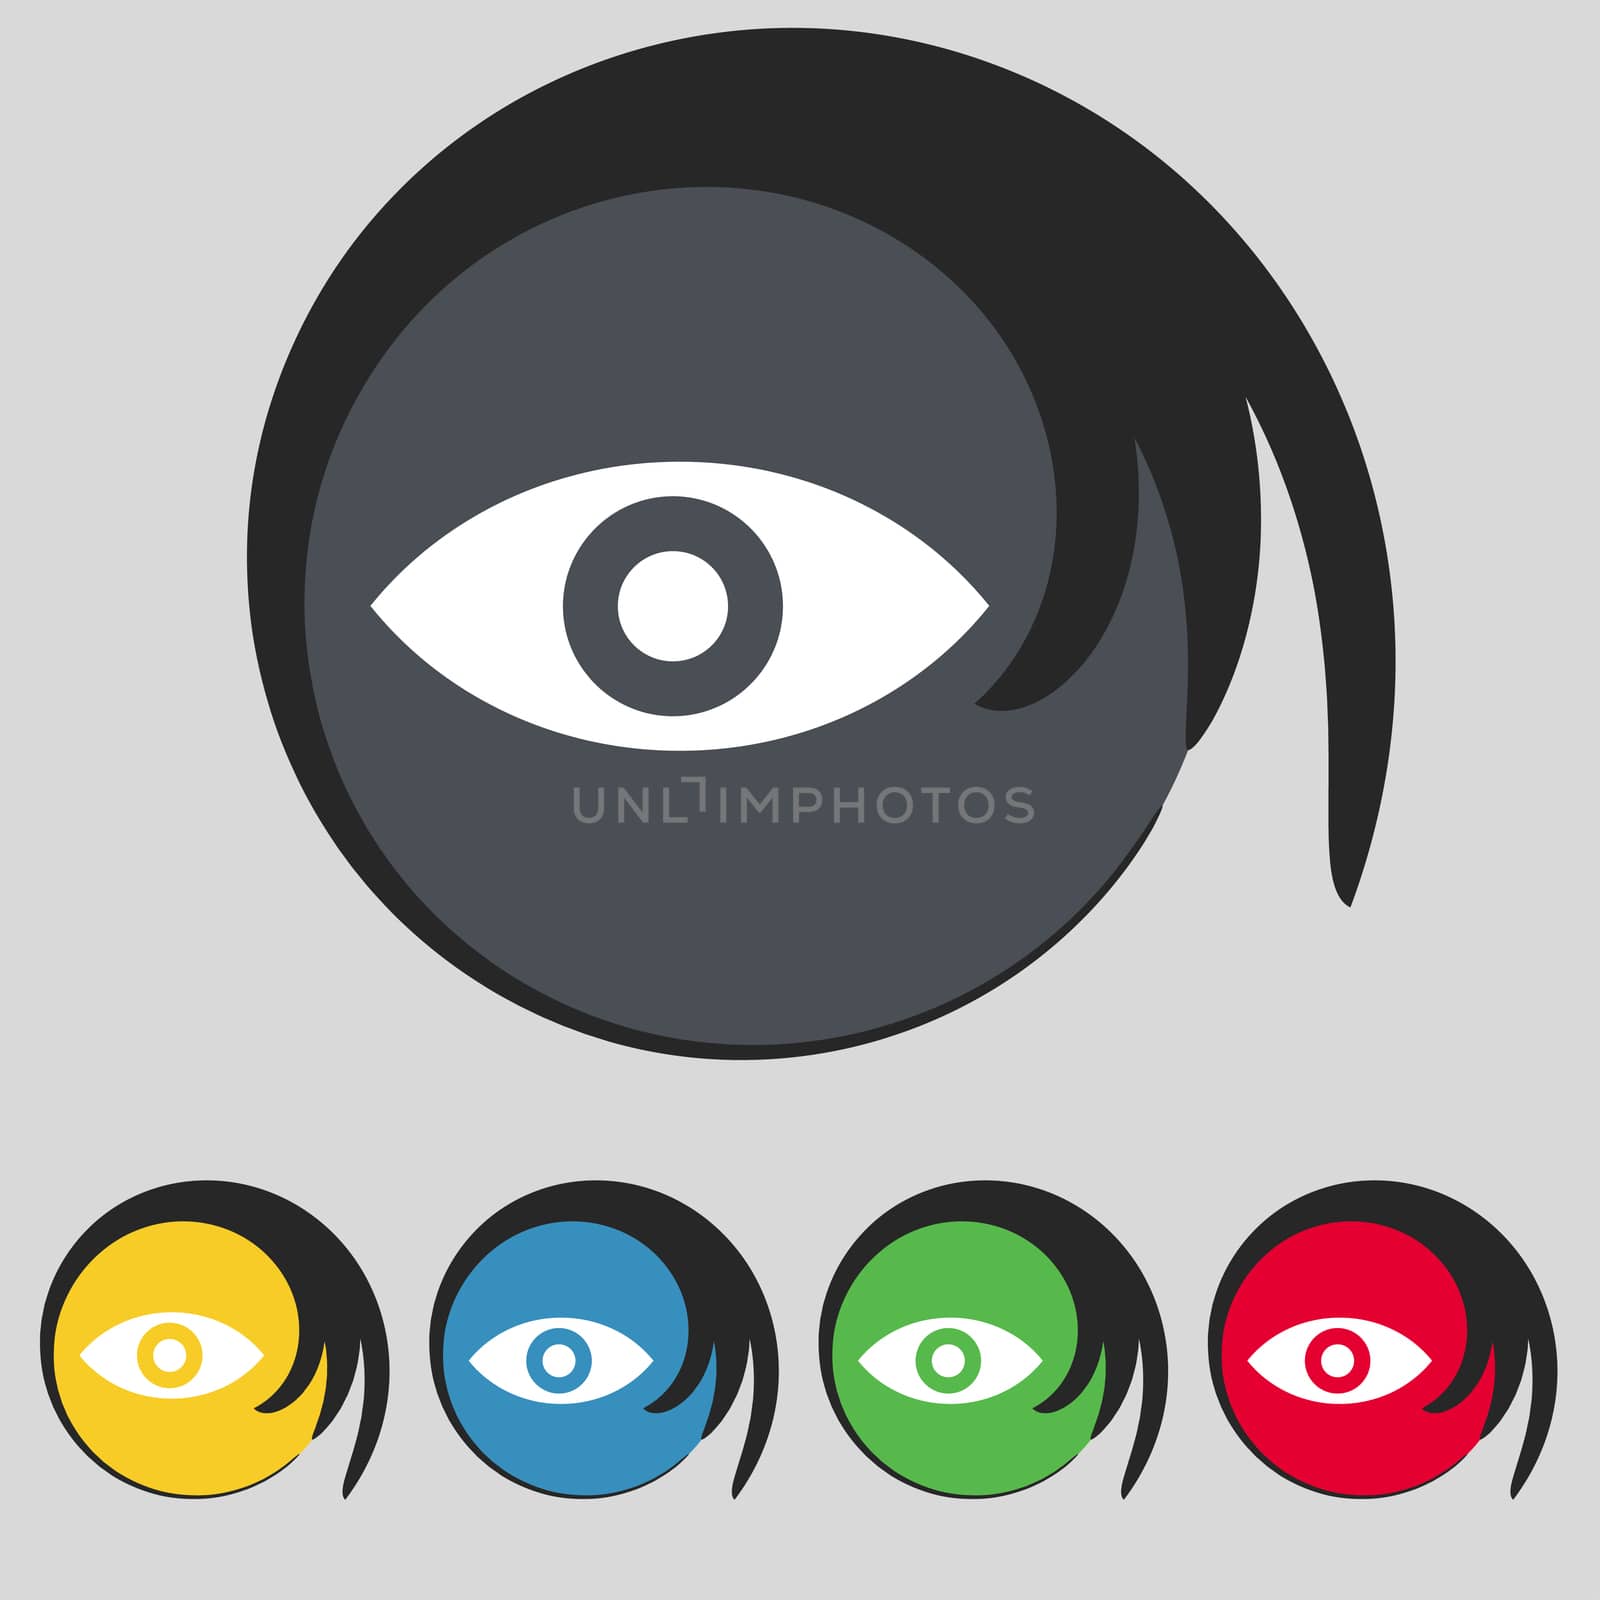 Eye, Publish content, sixth sense, intuition icon sign. Symbol on five colored buttons. illustration